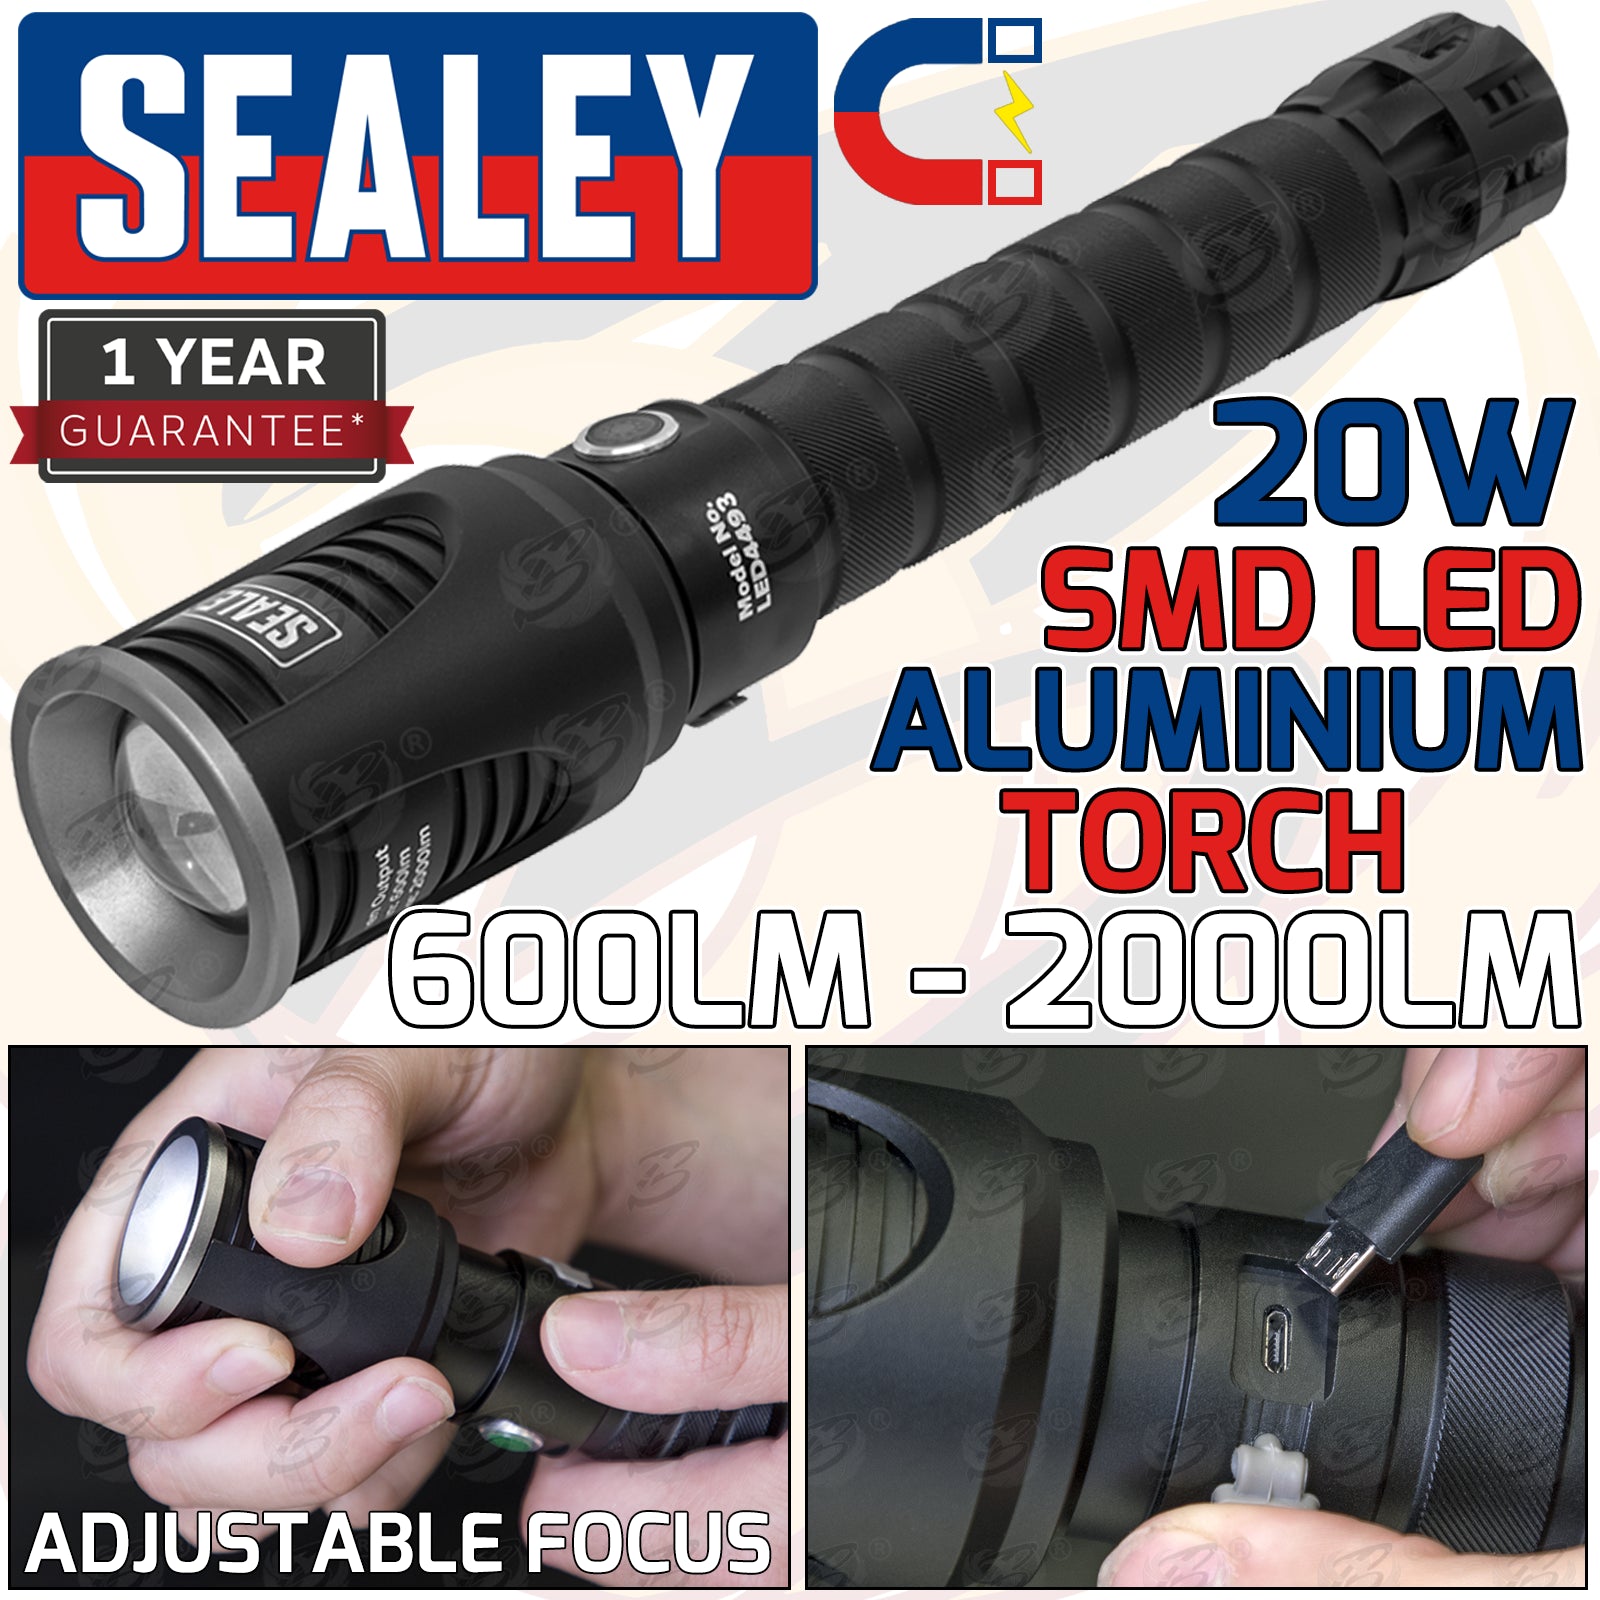 SEALEY RECHARGEABLE LI - ION SMD LED TORCH 20W 600LM - 2000LM